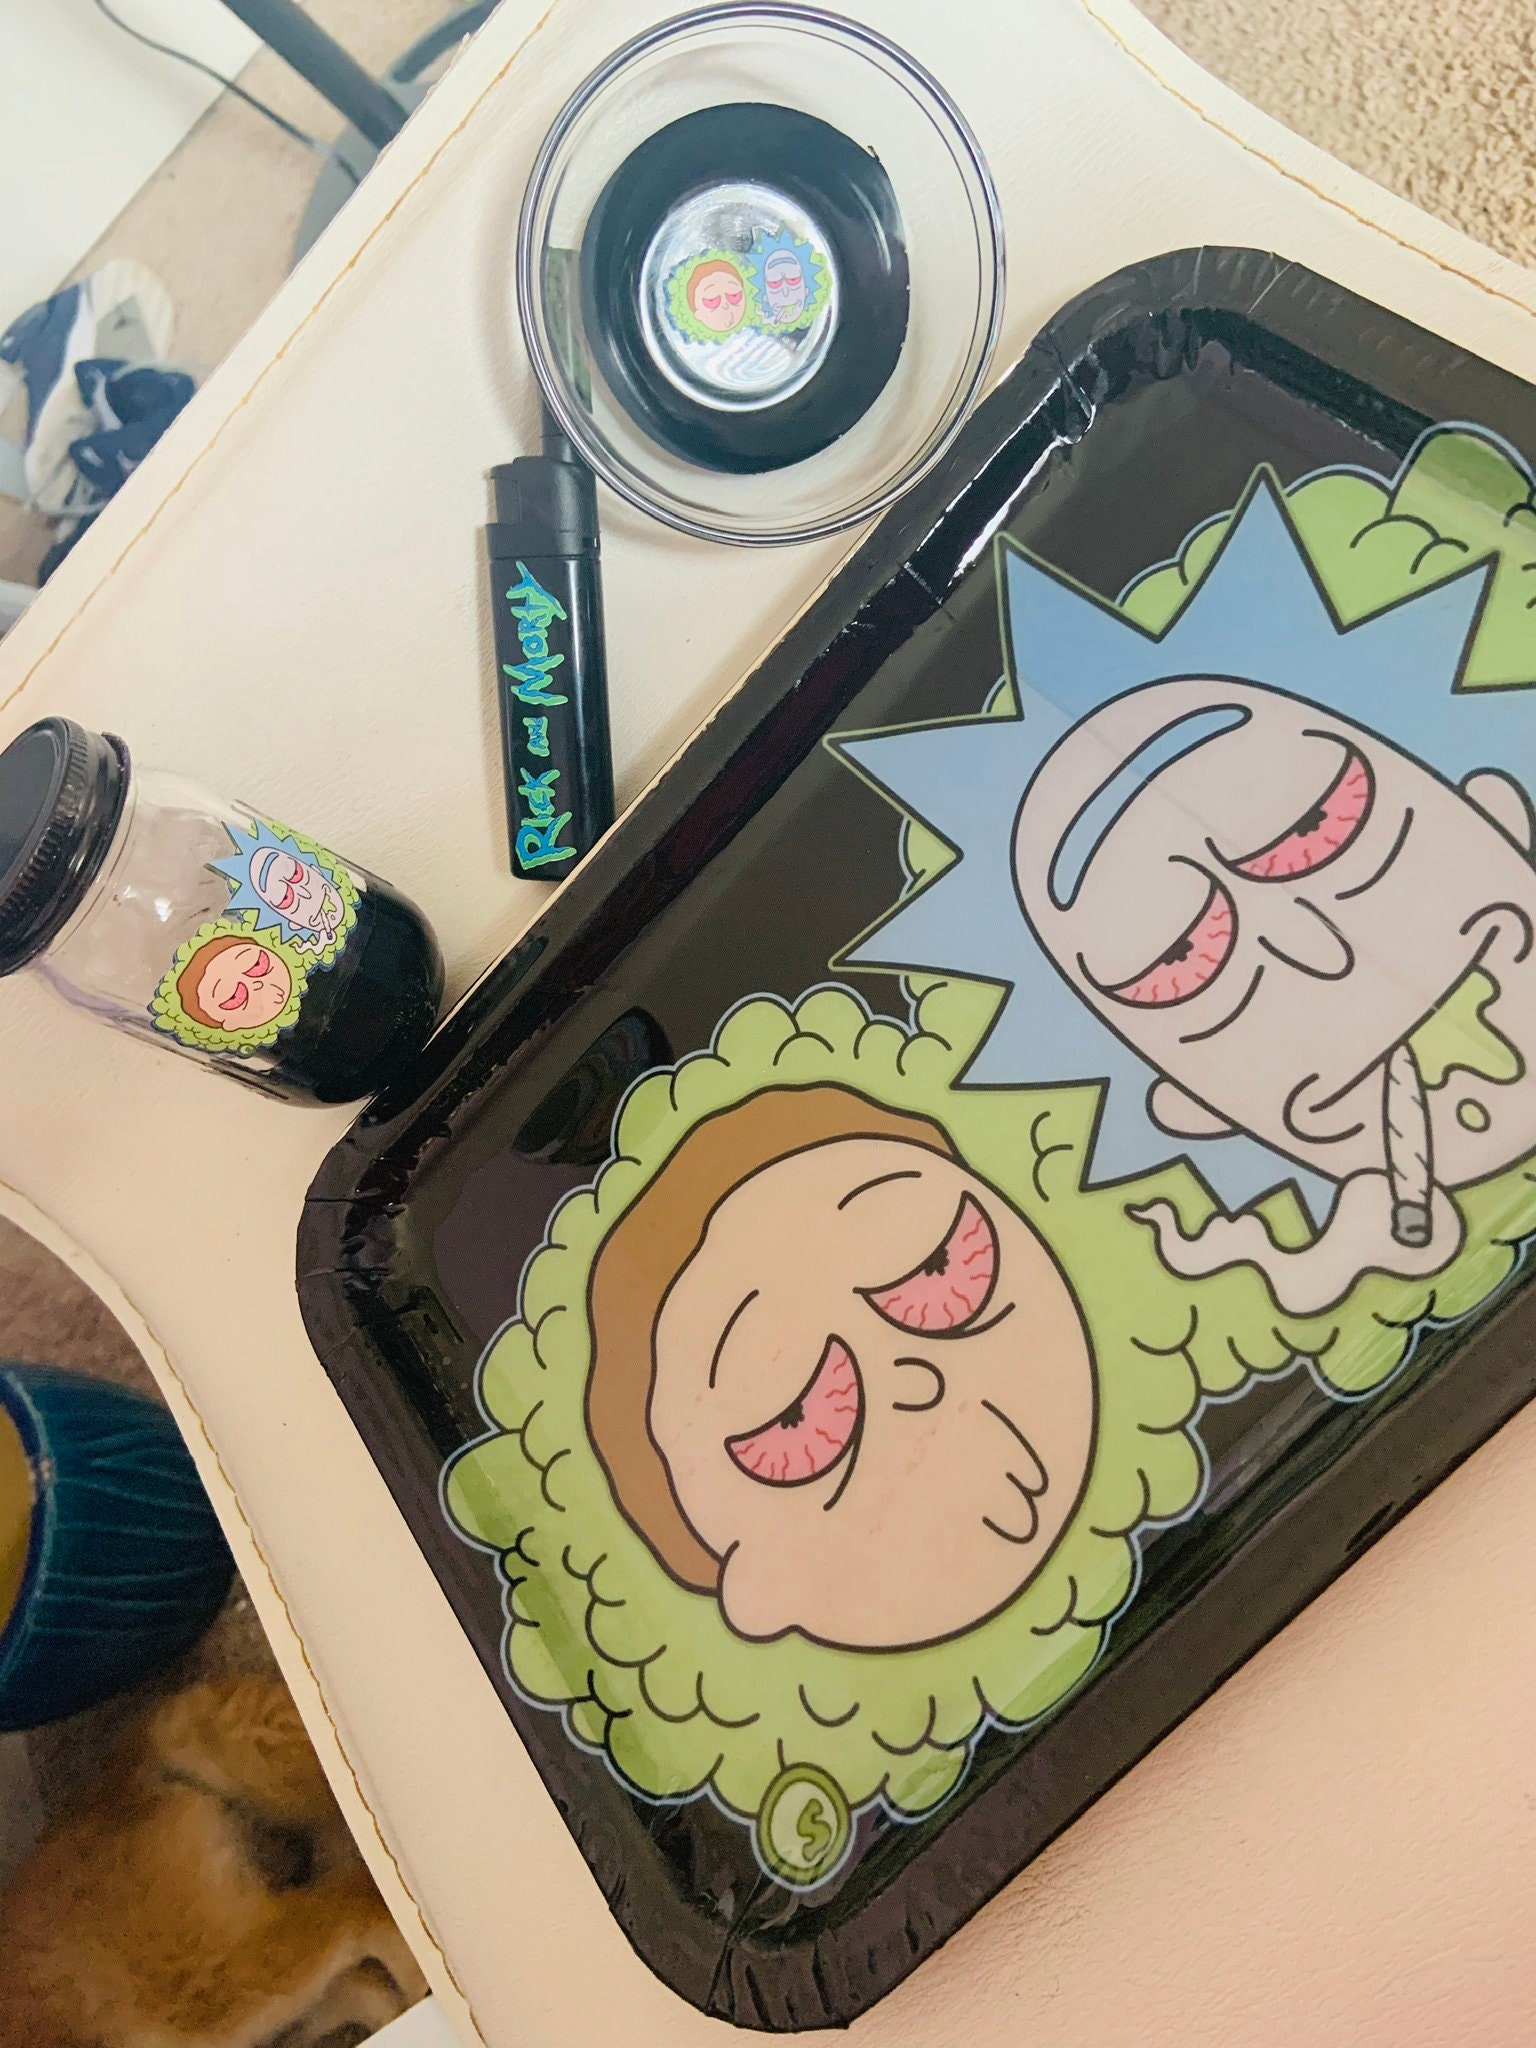 Cookies I'm Pickle Rick Rolling Tray Smoking Set - Smell Proof Stuff